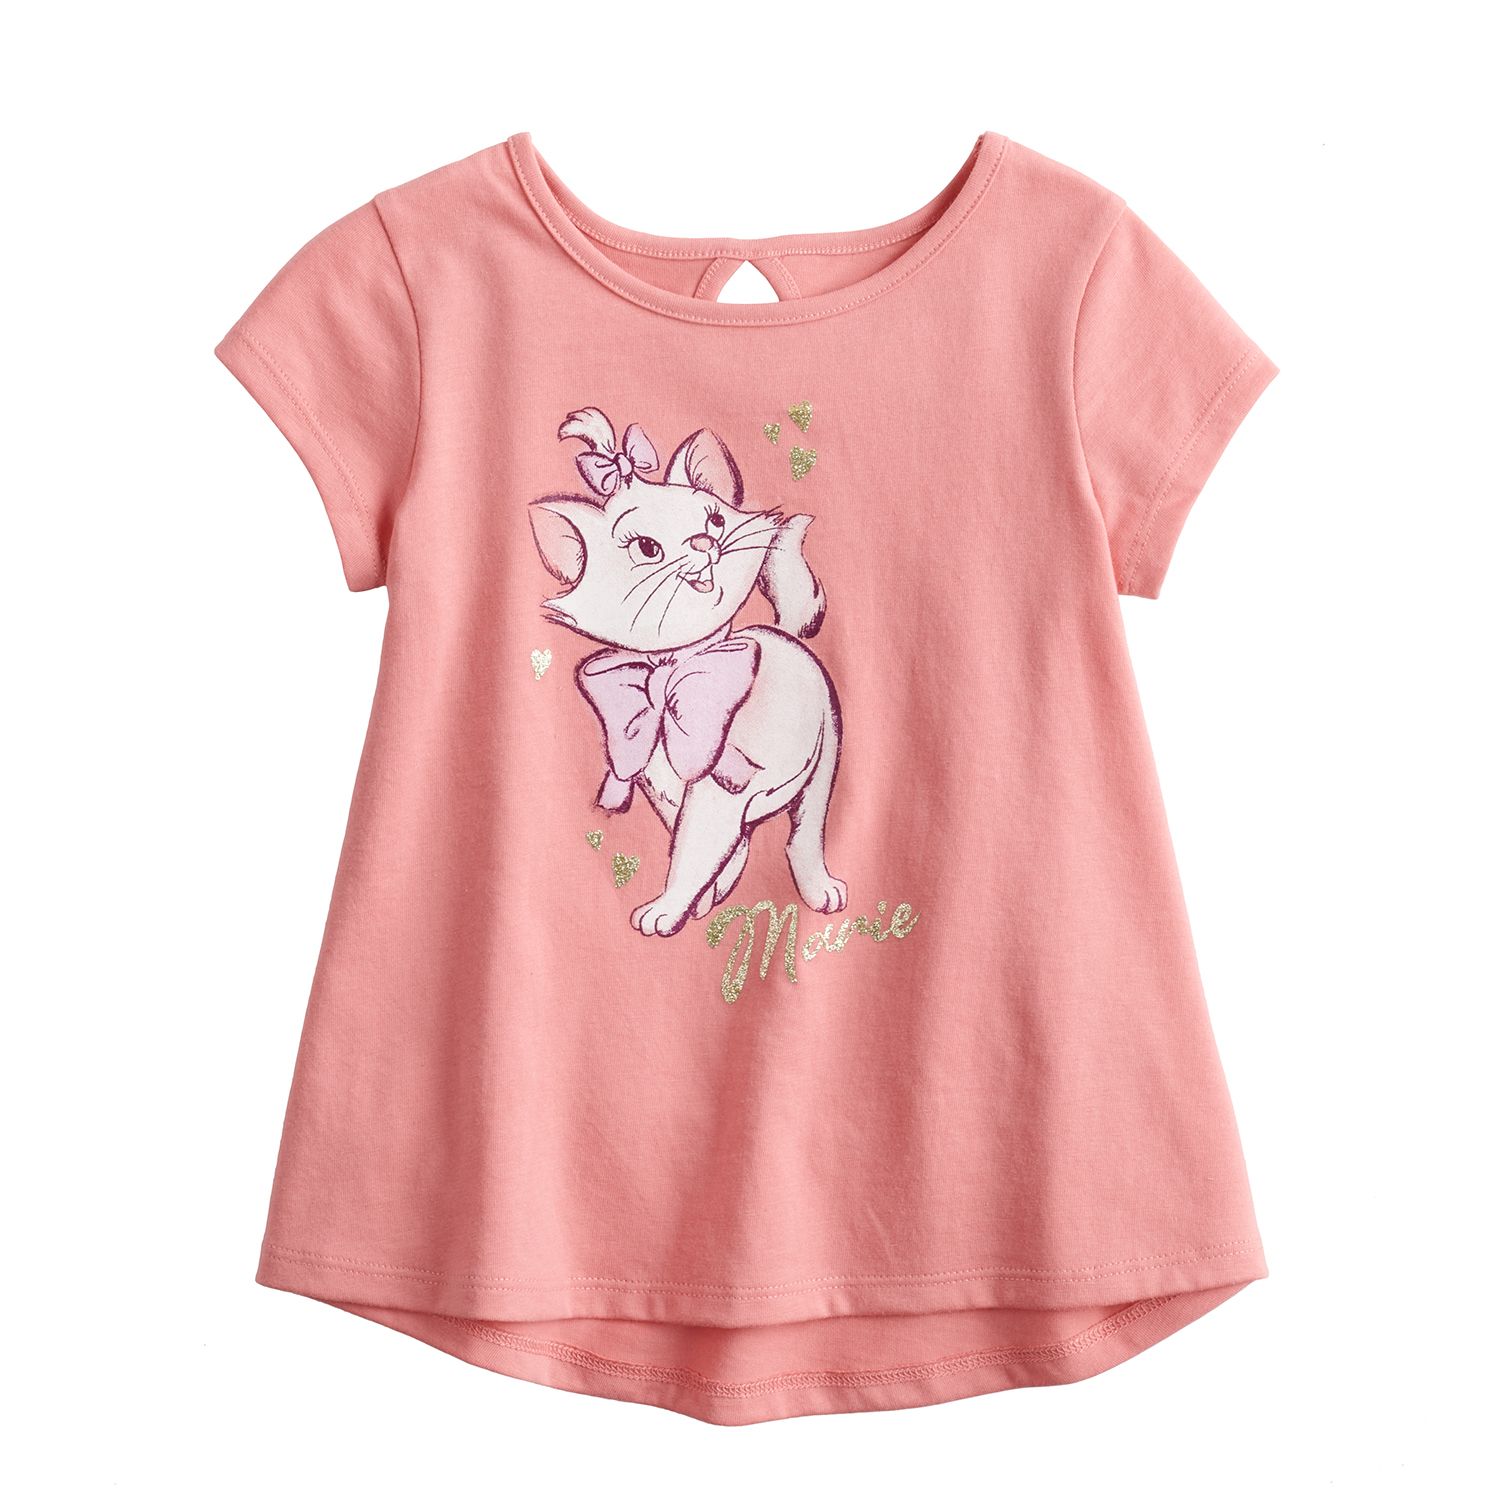 Image for Disney/Jumping Beans Disney's Aristocats Marie Toddler Girl Short-Sleeve Swing Tee by Jumping Beans® at Kohl's.